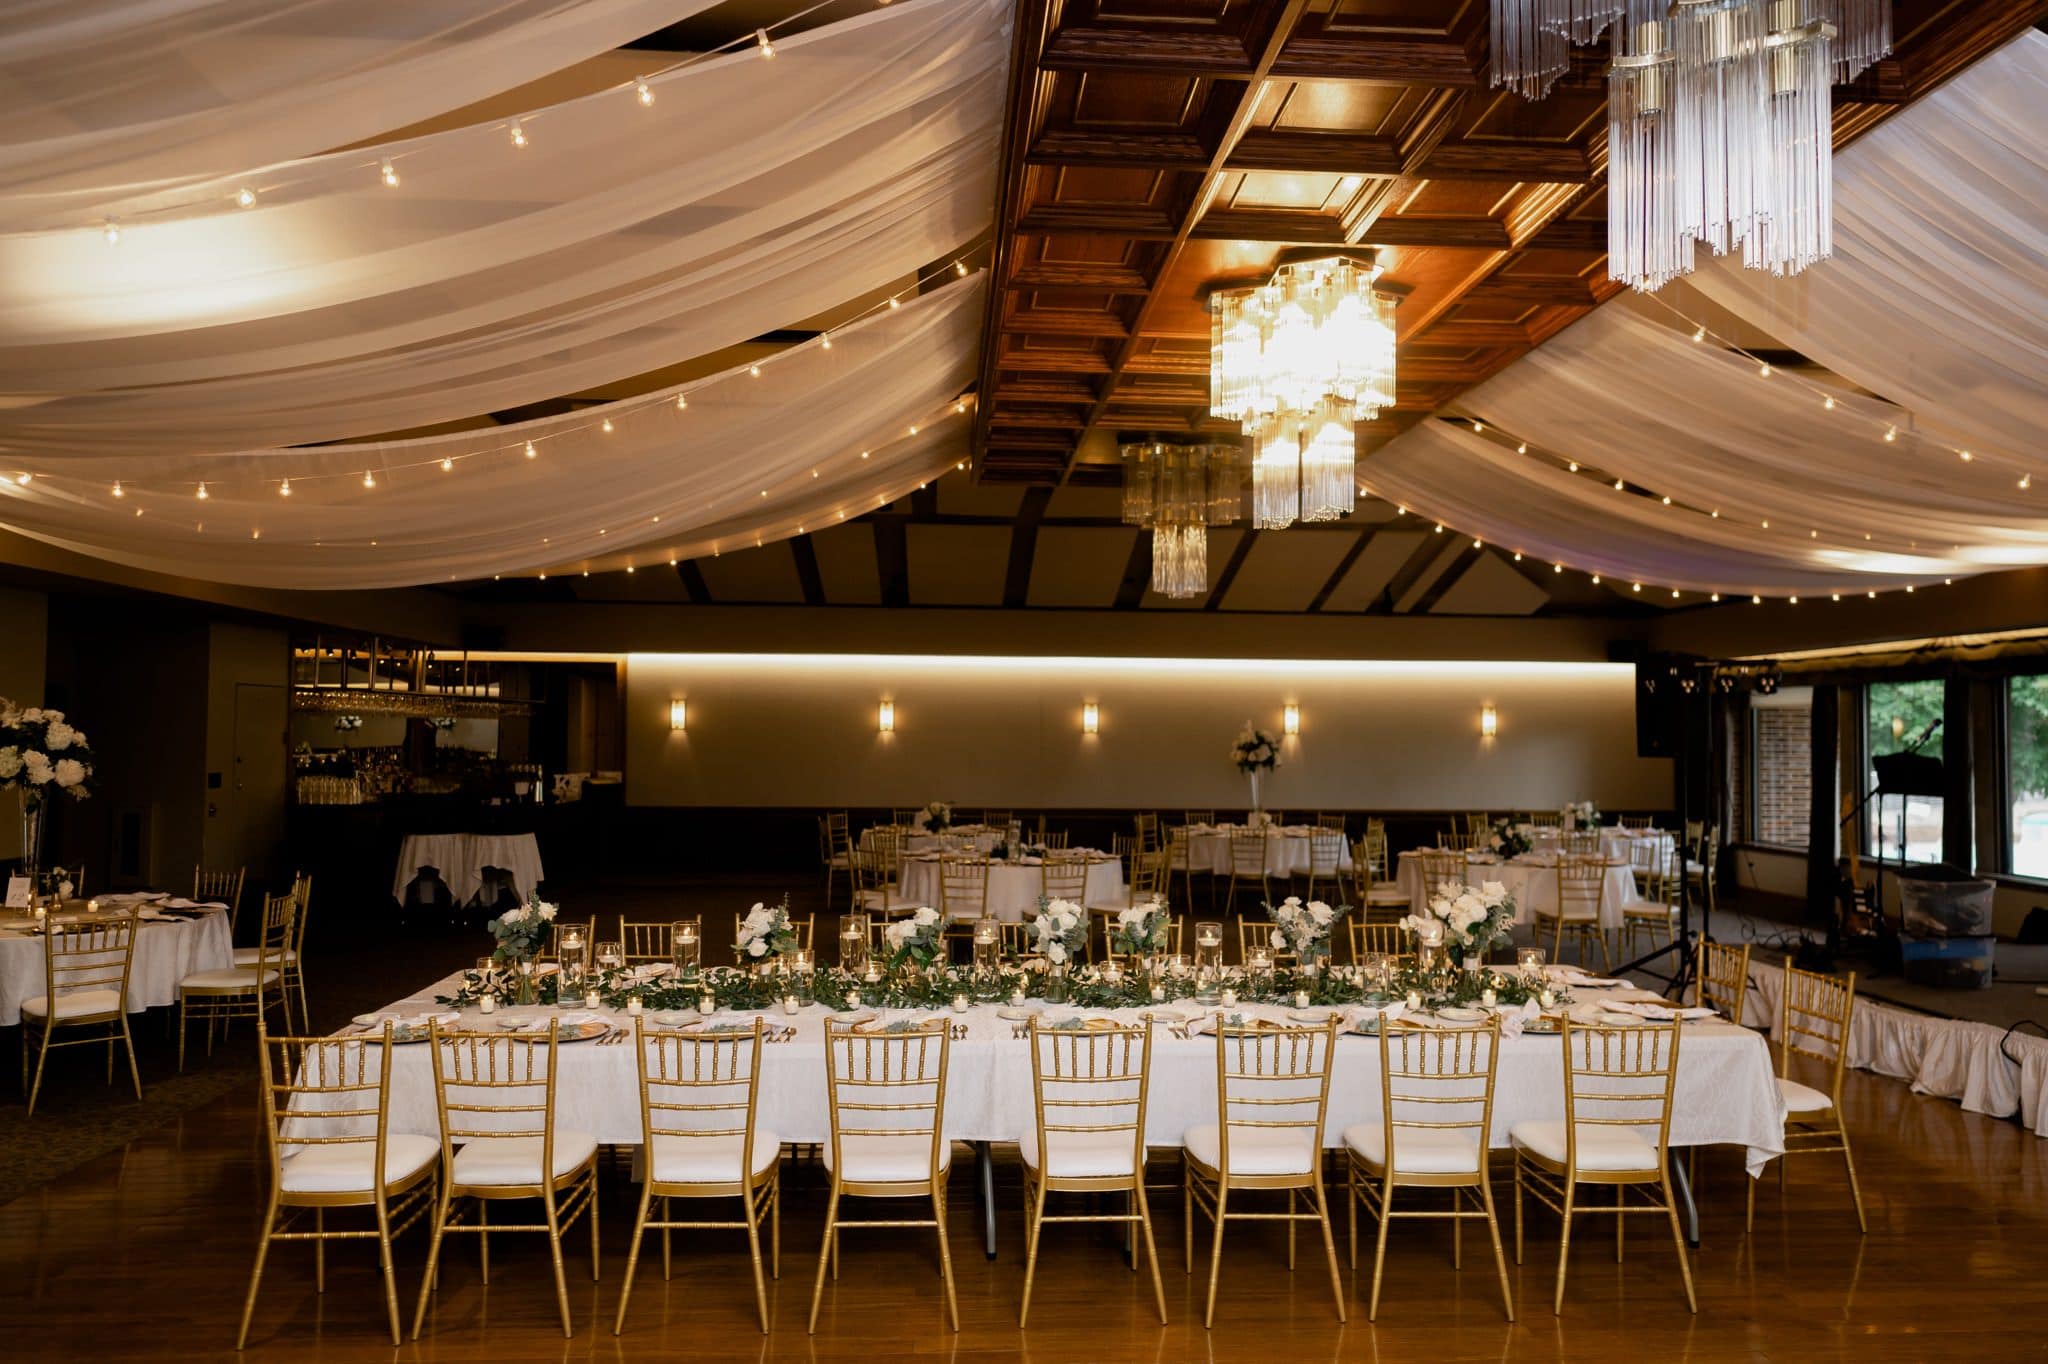 Des Moines Golf and Country Club wedding reception